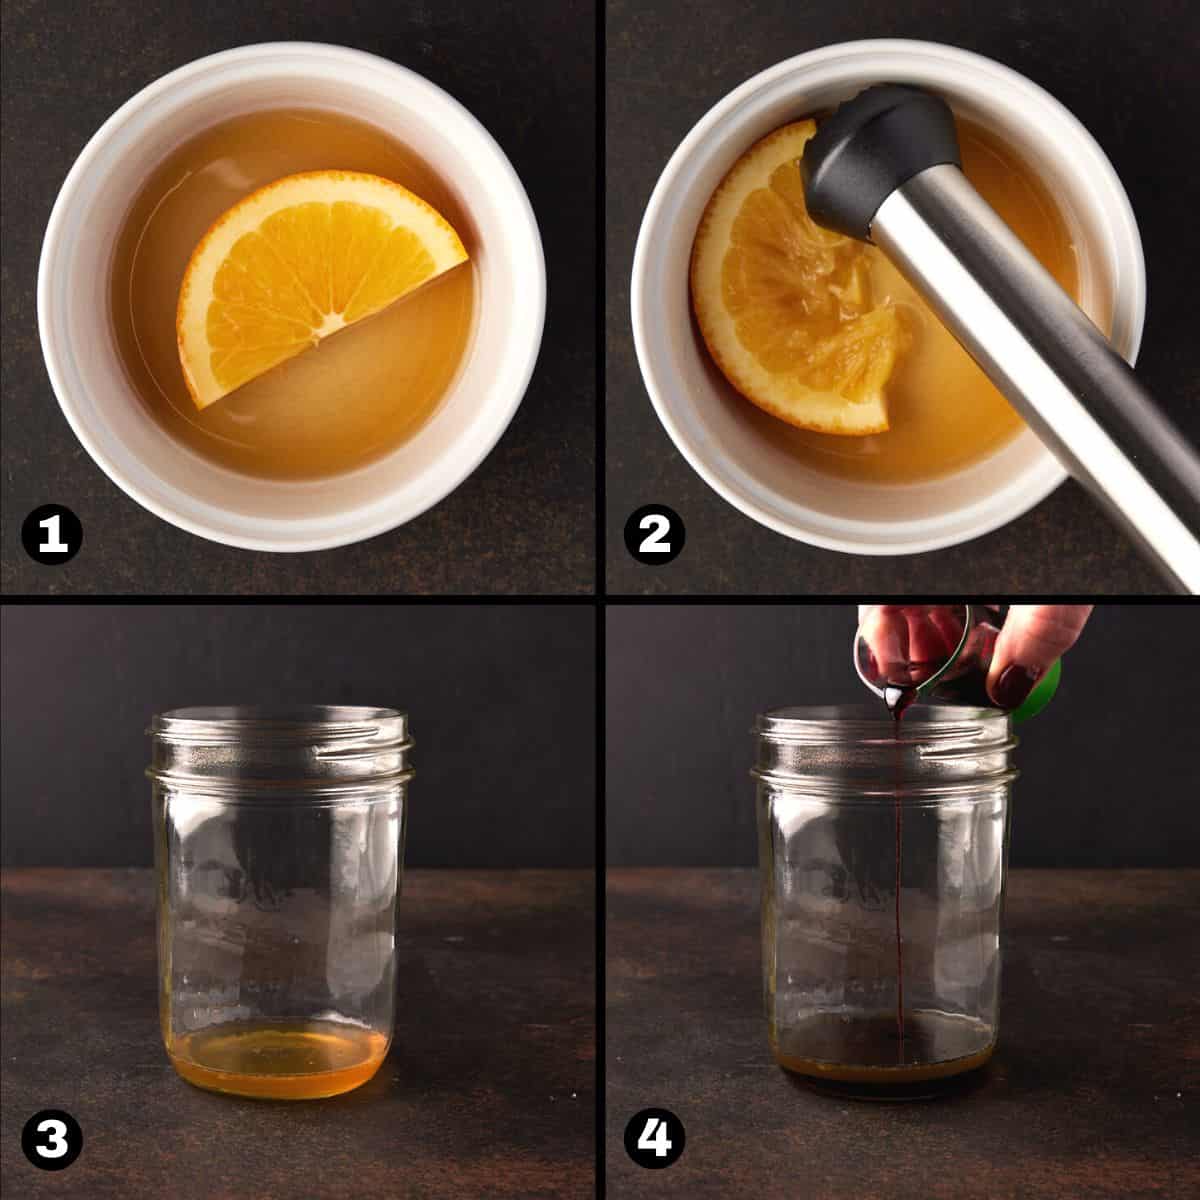 Orange wedge and syrup in bowl, muddled, and in jar with cherry juice being poured in.